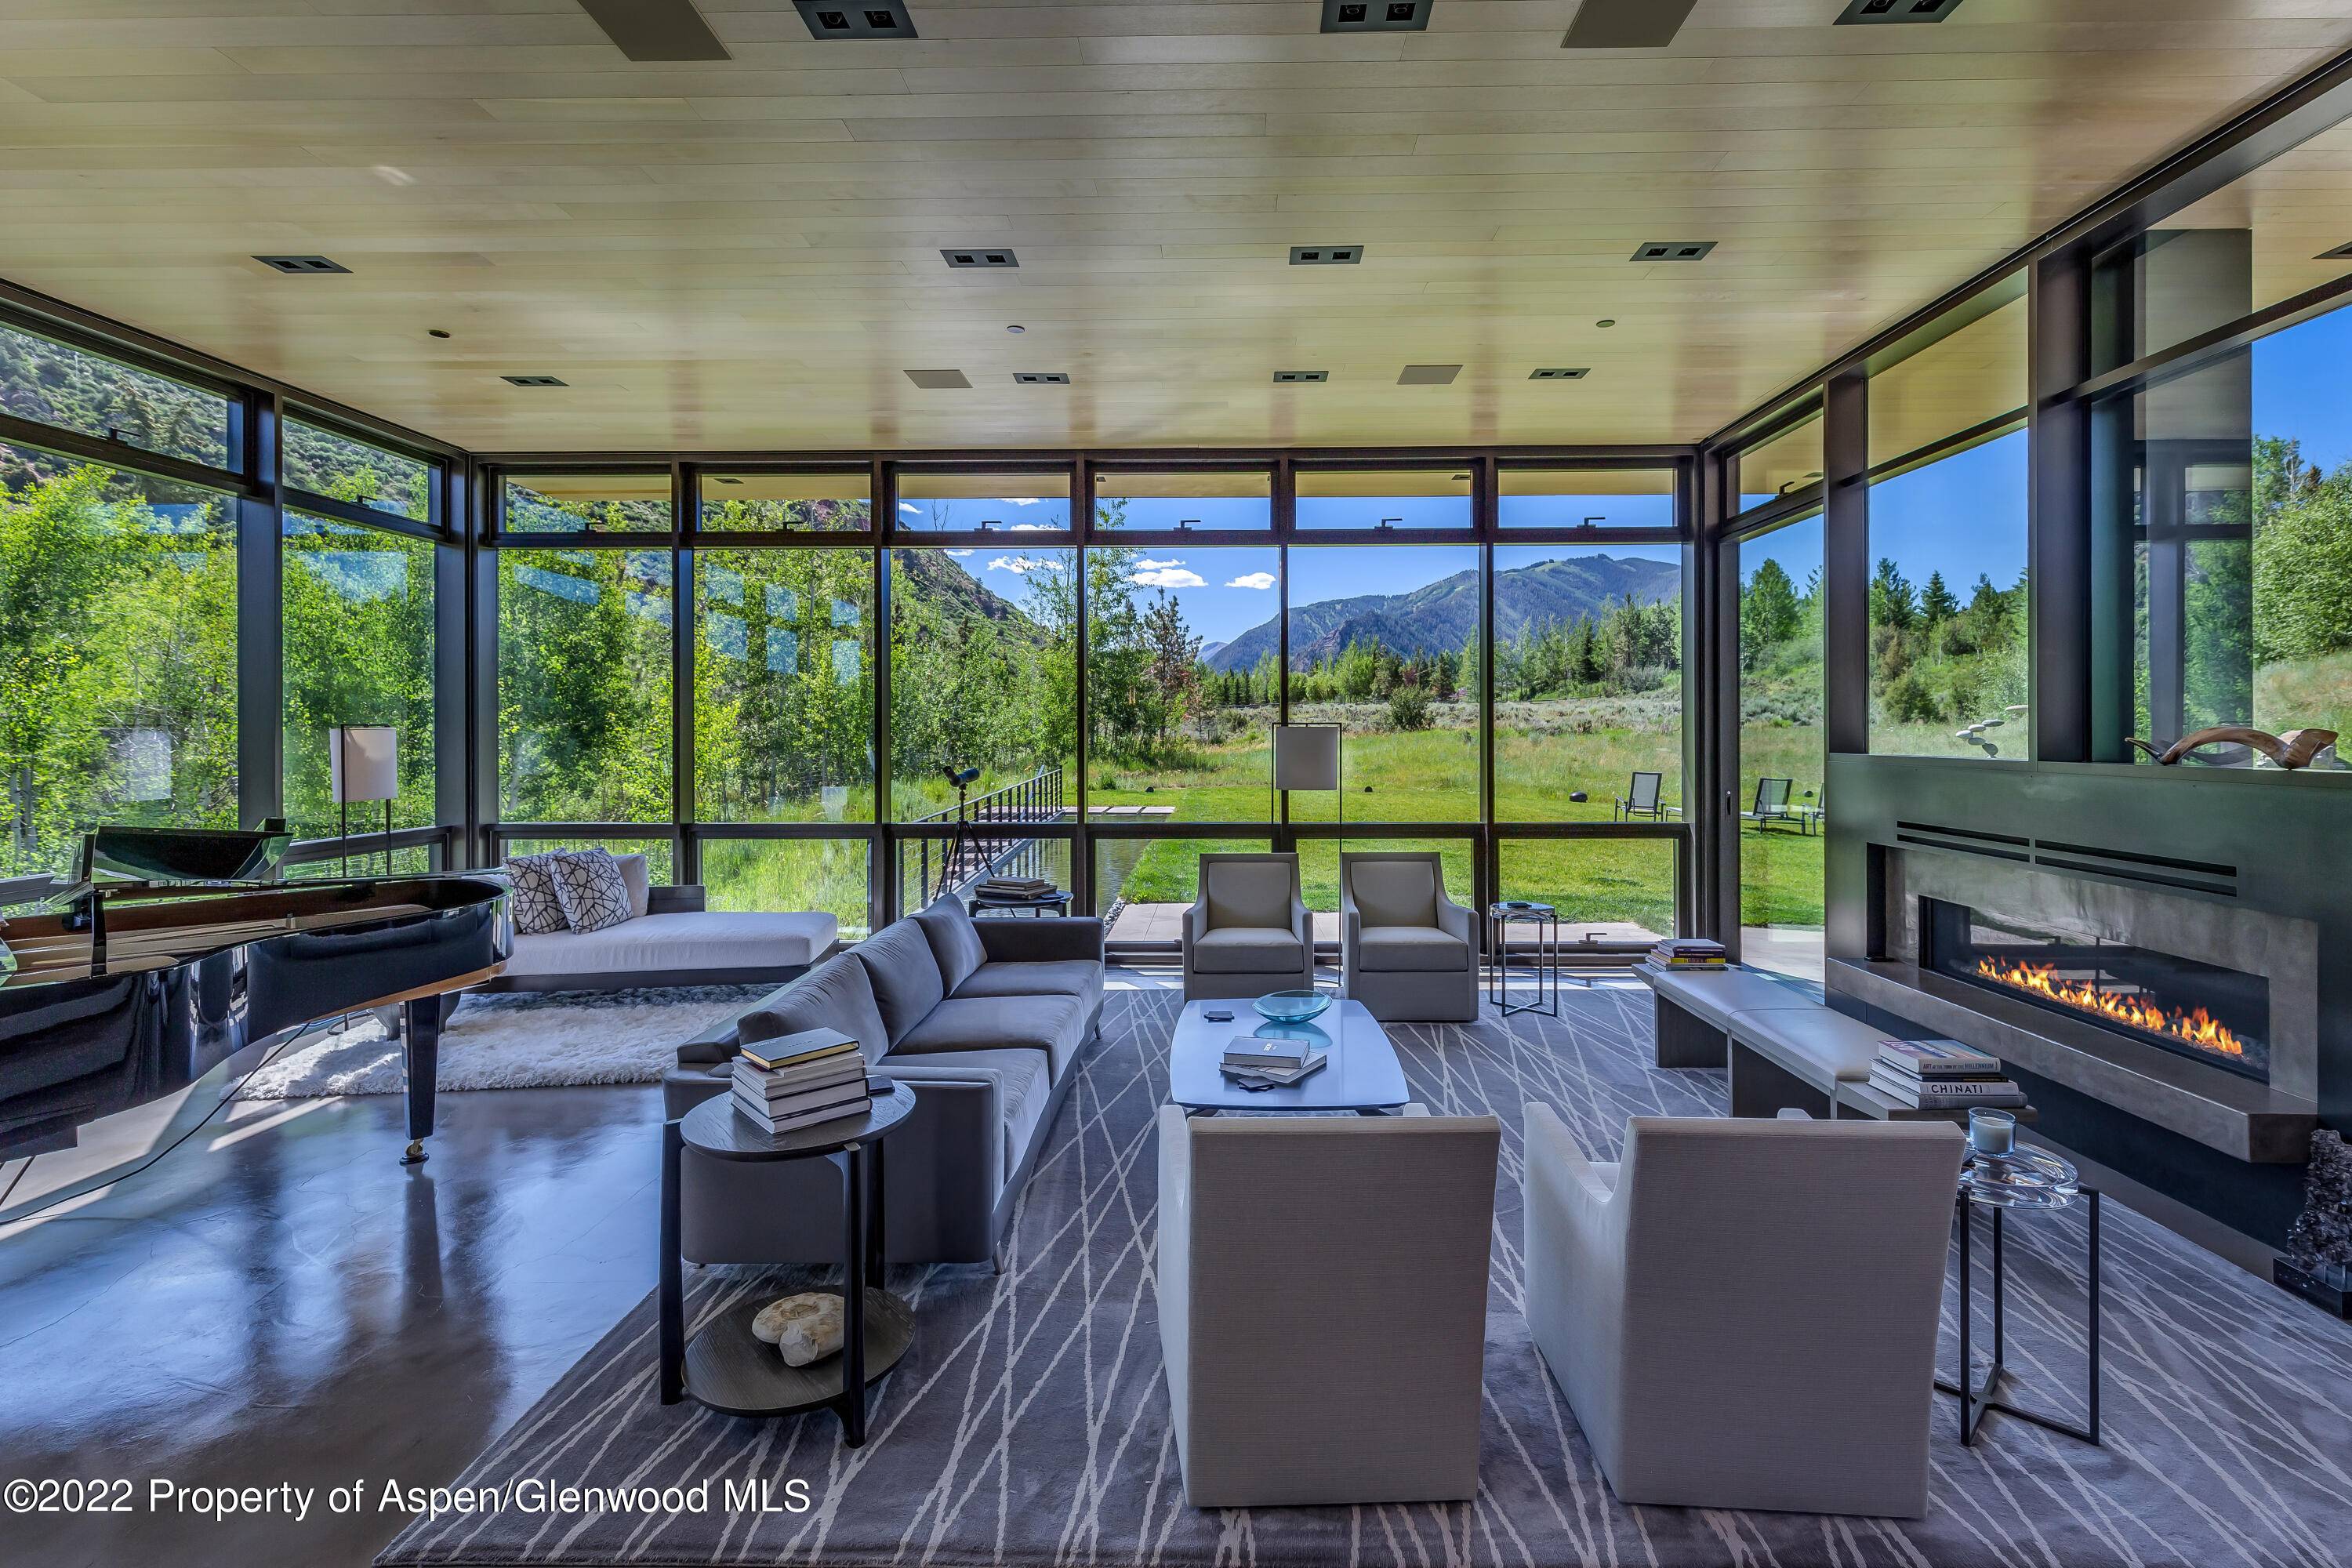 This stunning 7 bedroom contemporary home overlooking Maroon Creek offers almost 12, 000 square feet of living space and represents the best of the best !